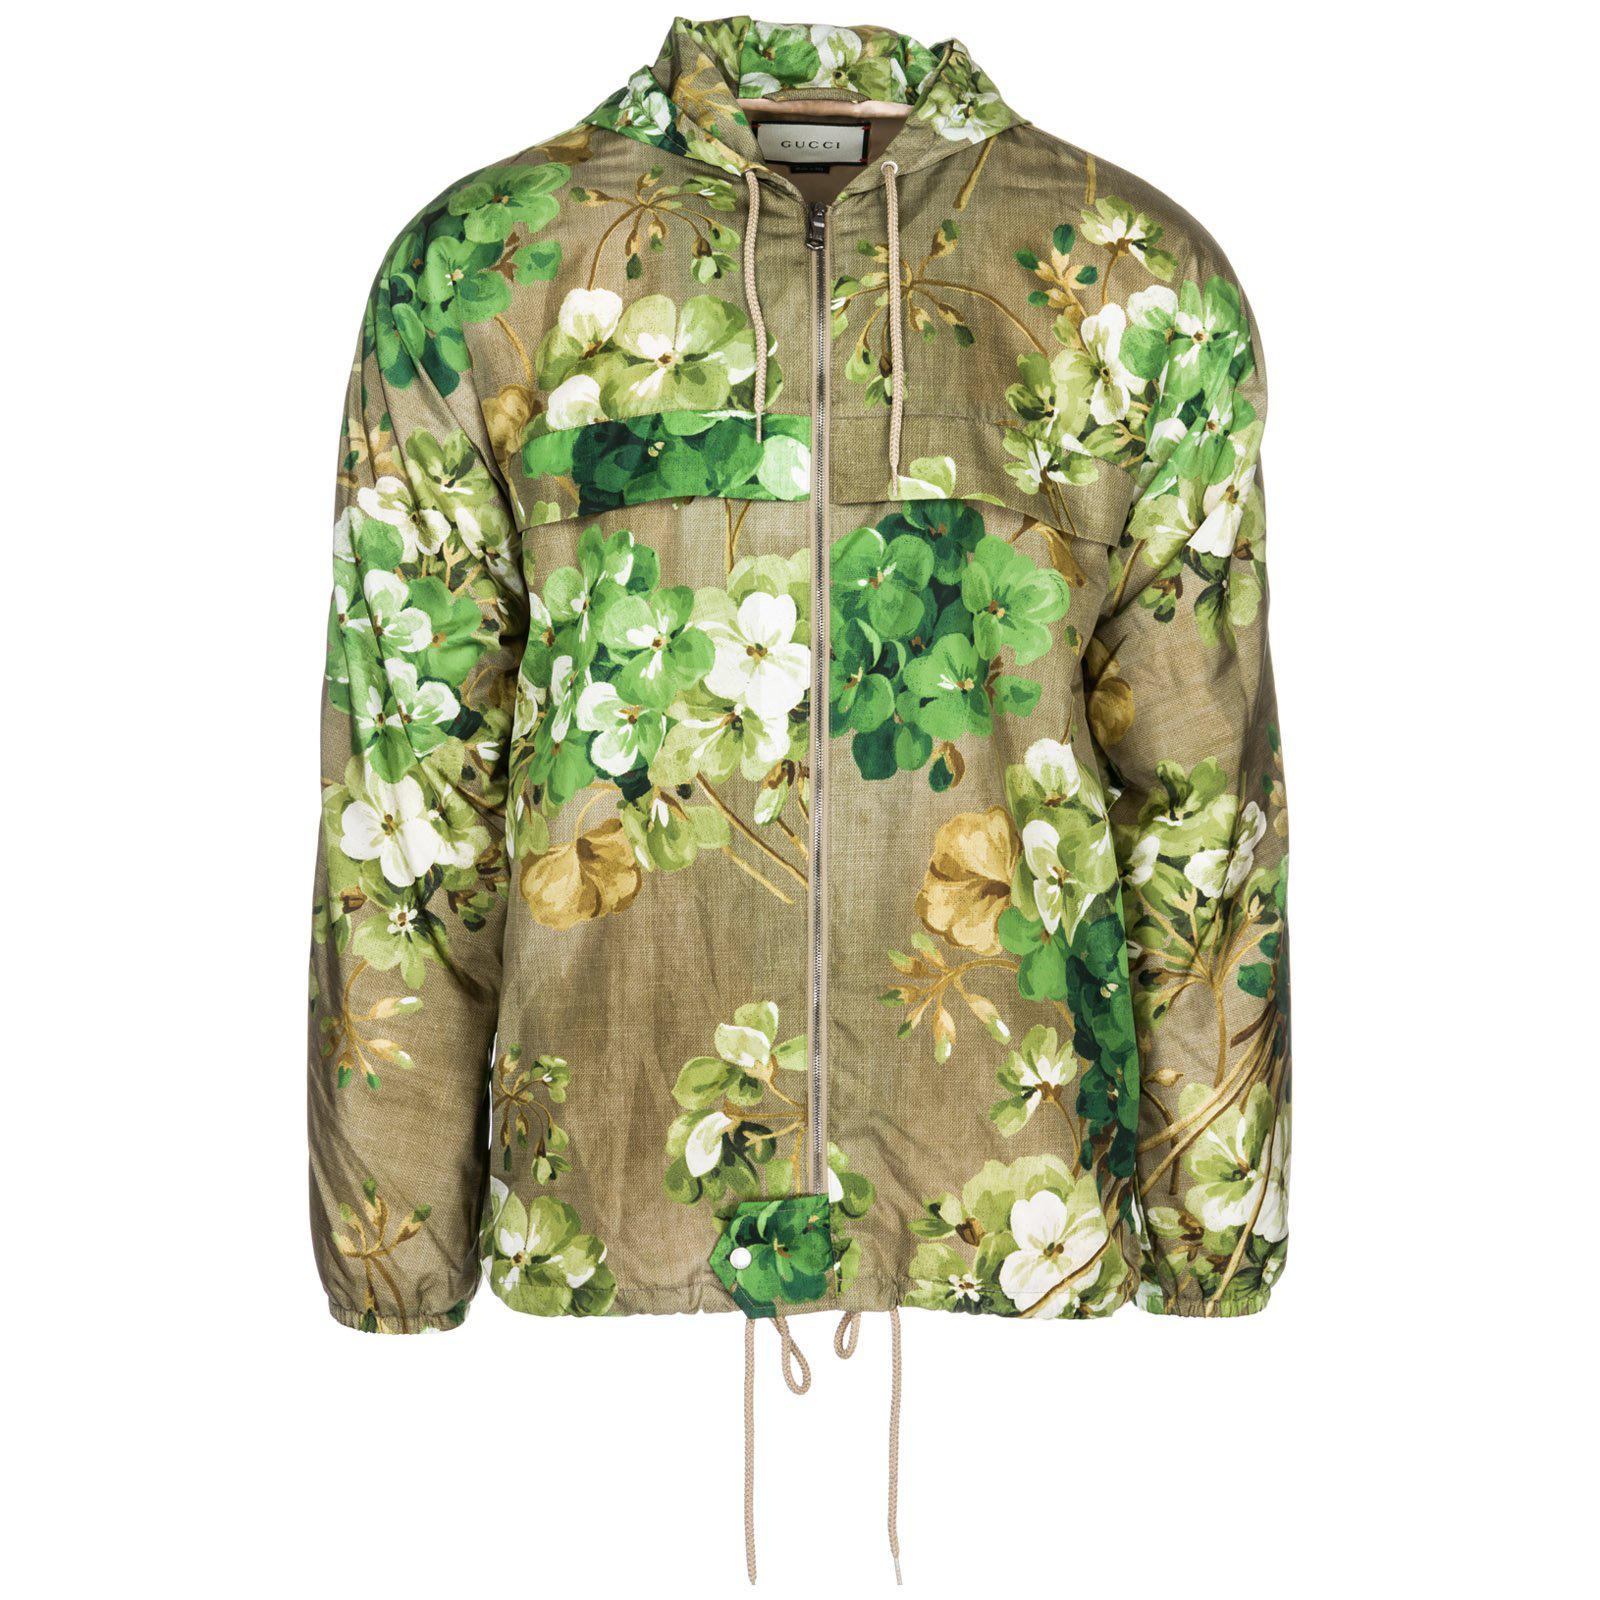 Gucci Synthetic Floral Print Windbreaker in Green for Men - Lyst